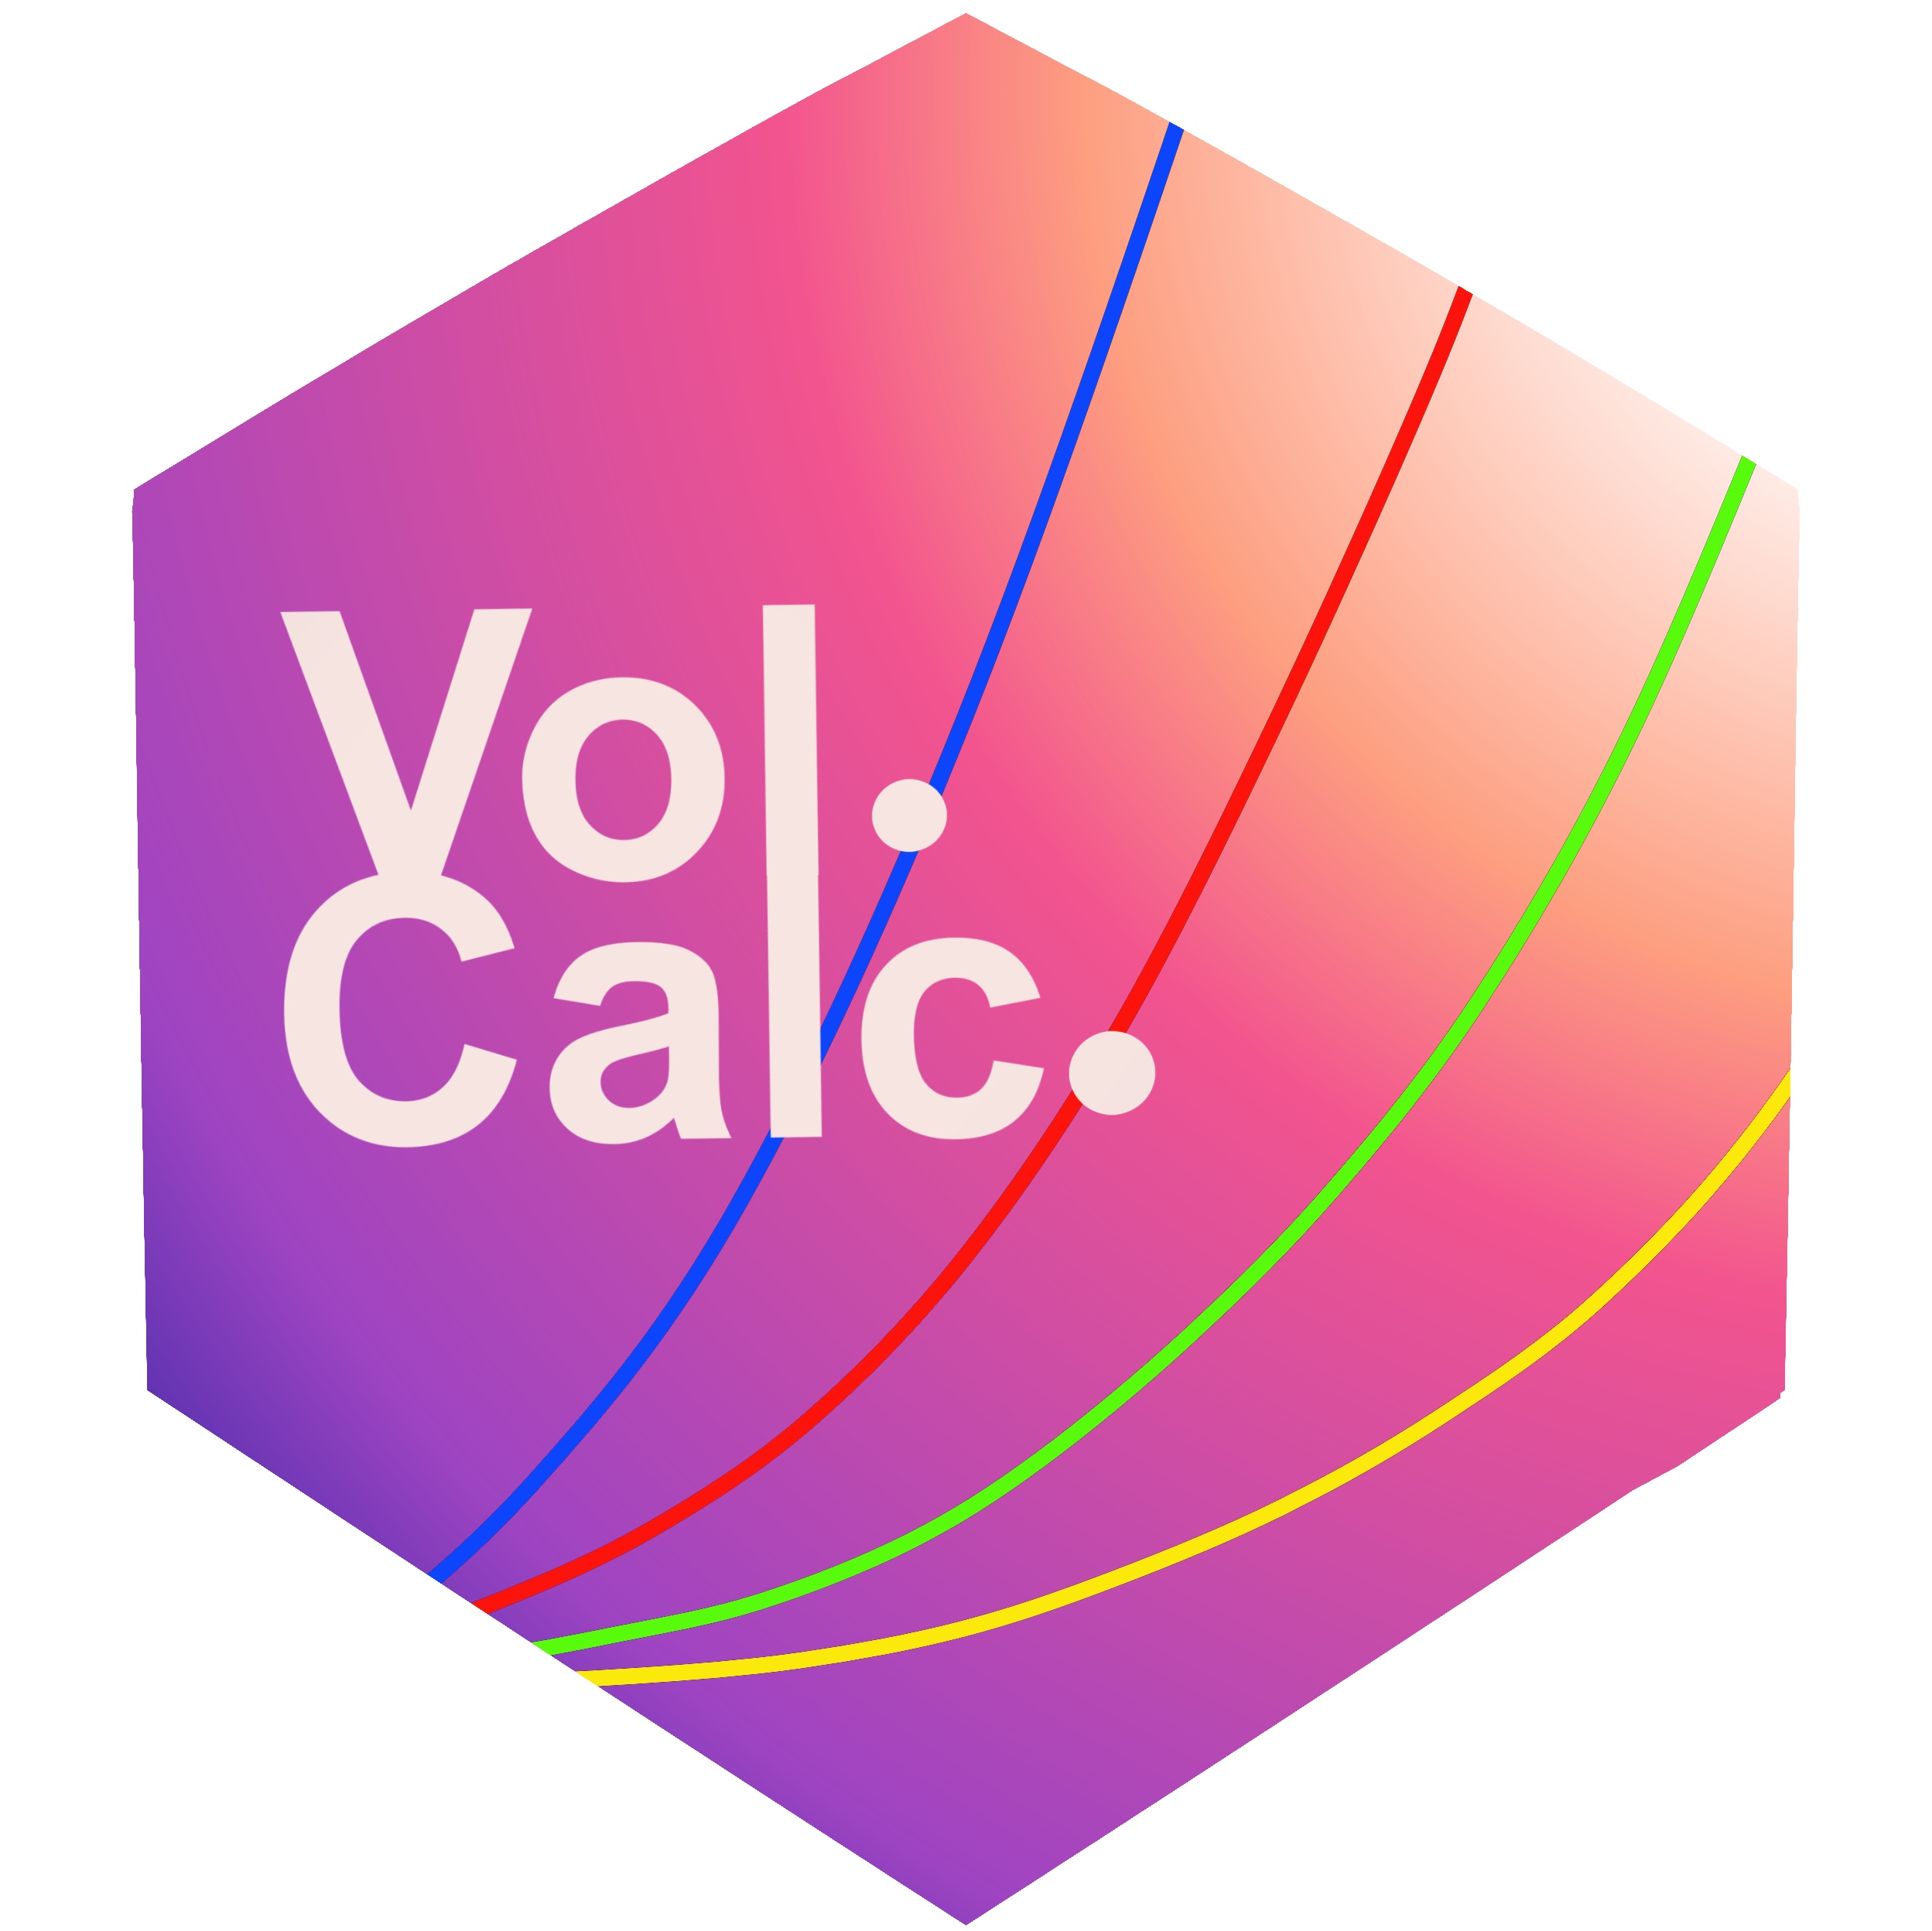 volcalc v2.1.0 released along with publication in Frontiers in ...